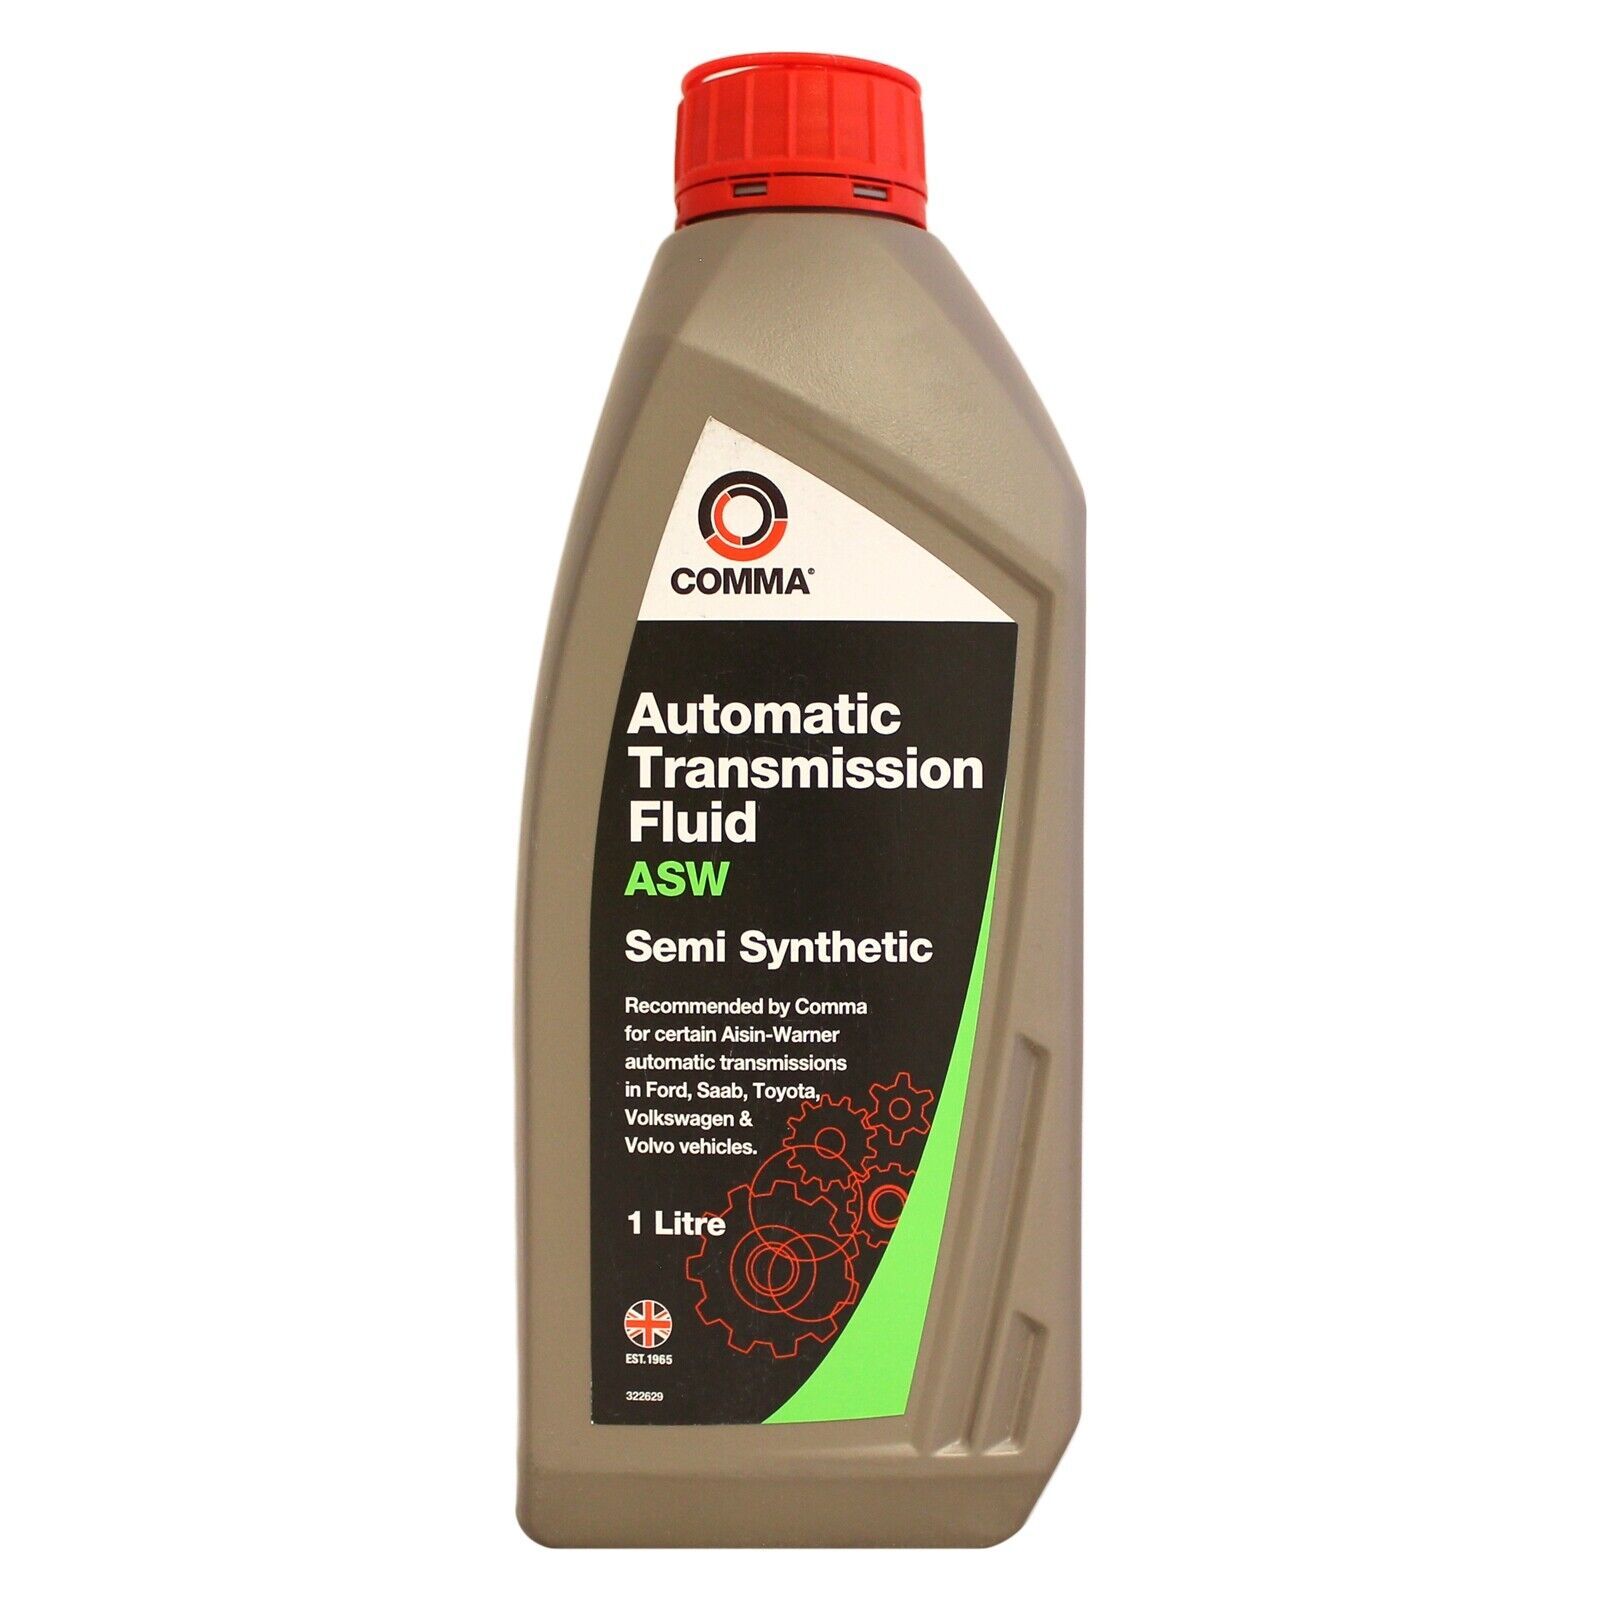 Atf 1 литр. Масло comma ATF. Comma Automatic transmission Fluid. Cooma m-901. Автомасло comma для КПП Ford.